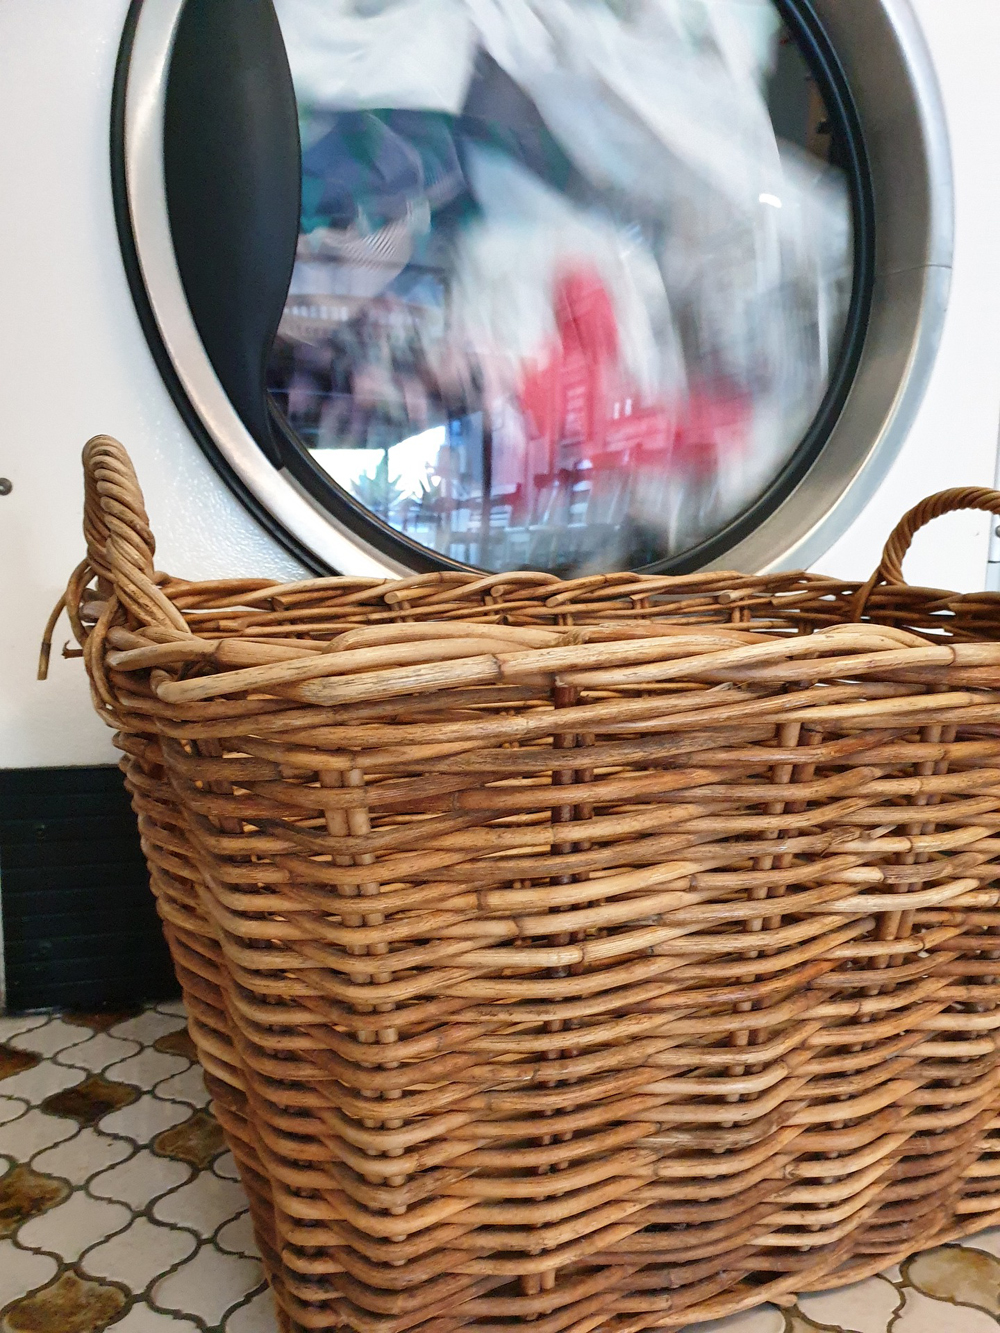 Laundry Made Easy – 7 Simple Tricks That Won’t Let You Down